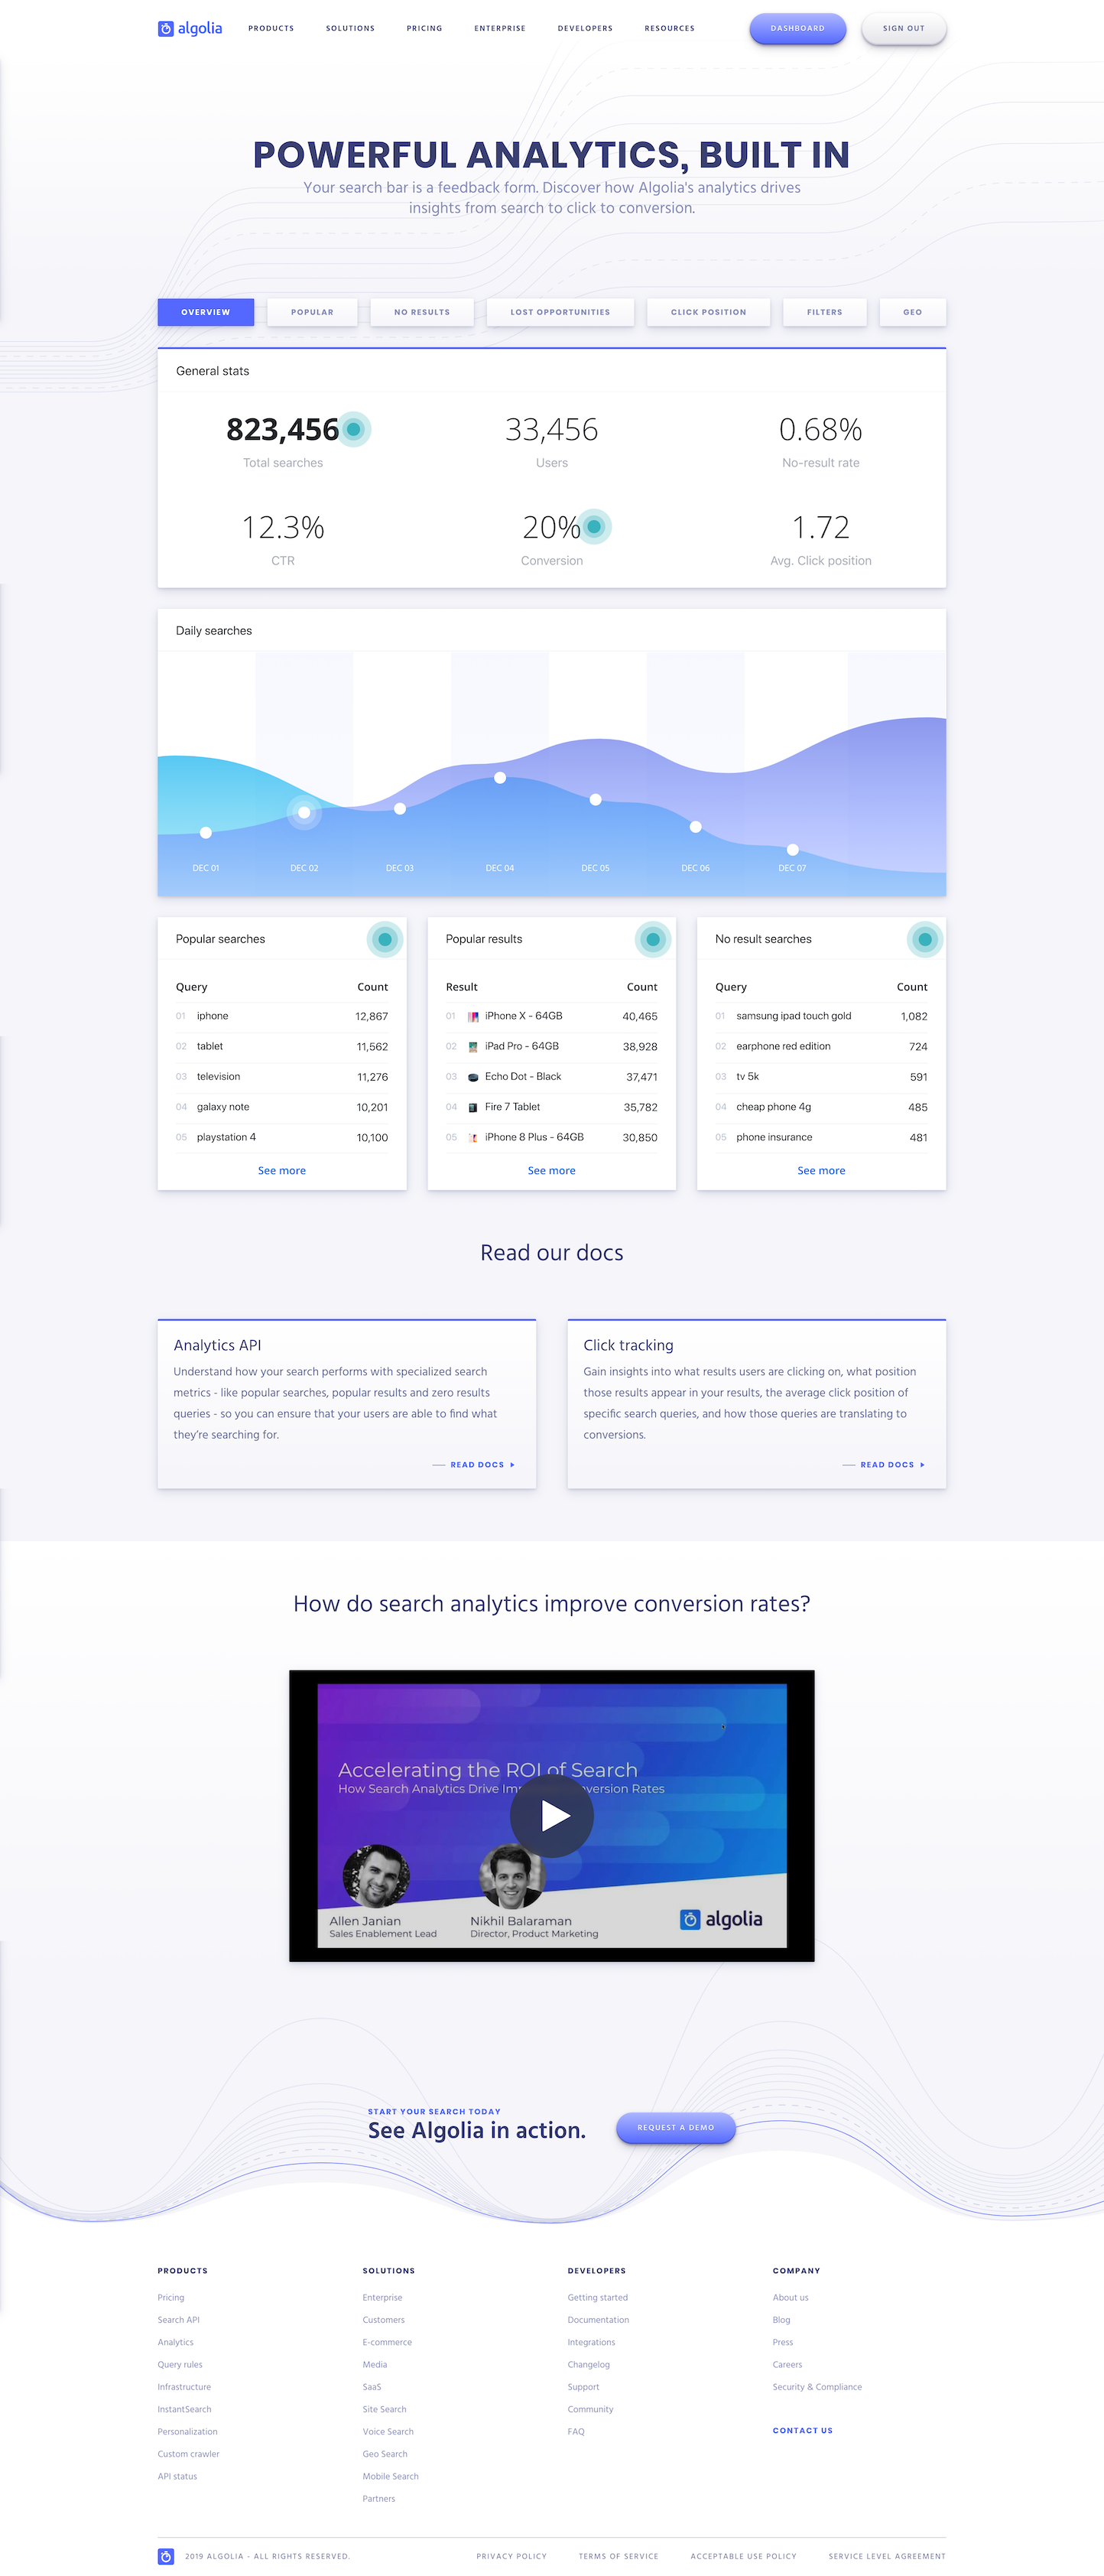 Screenshot of the Product - Analytics page from the Algolia website.